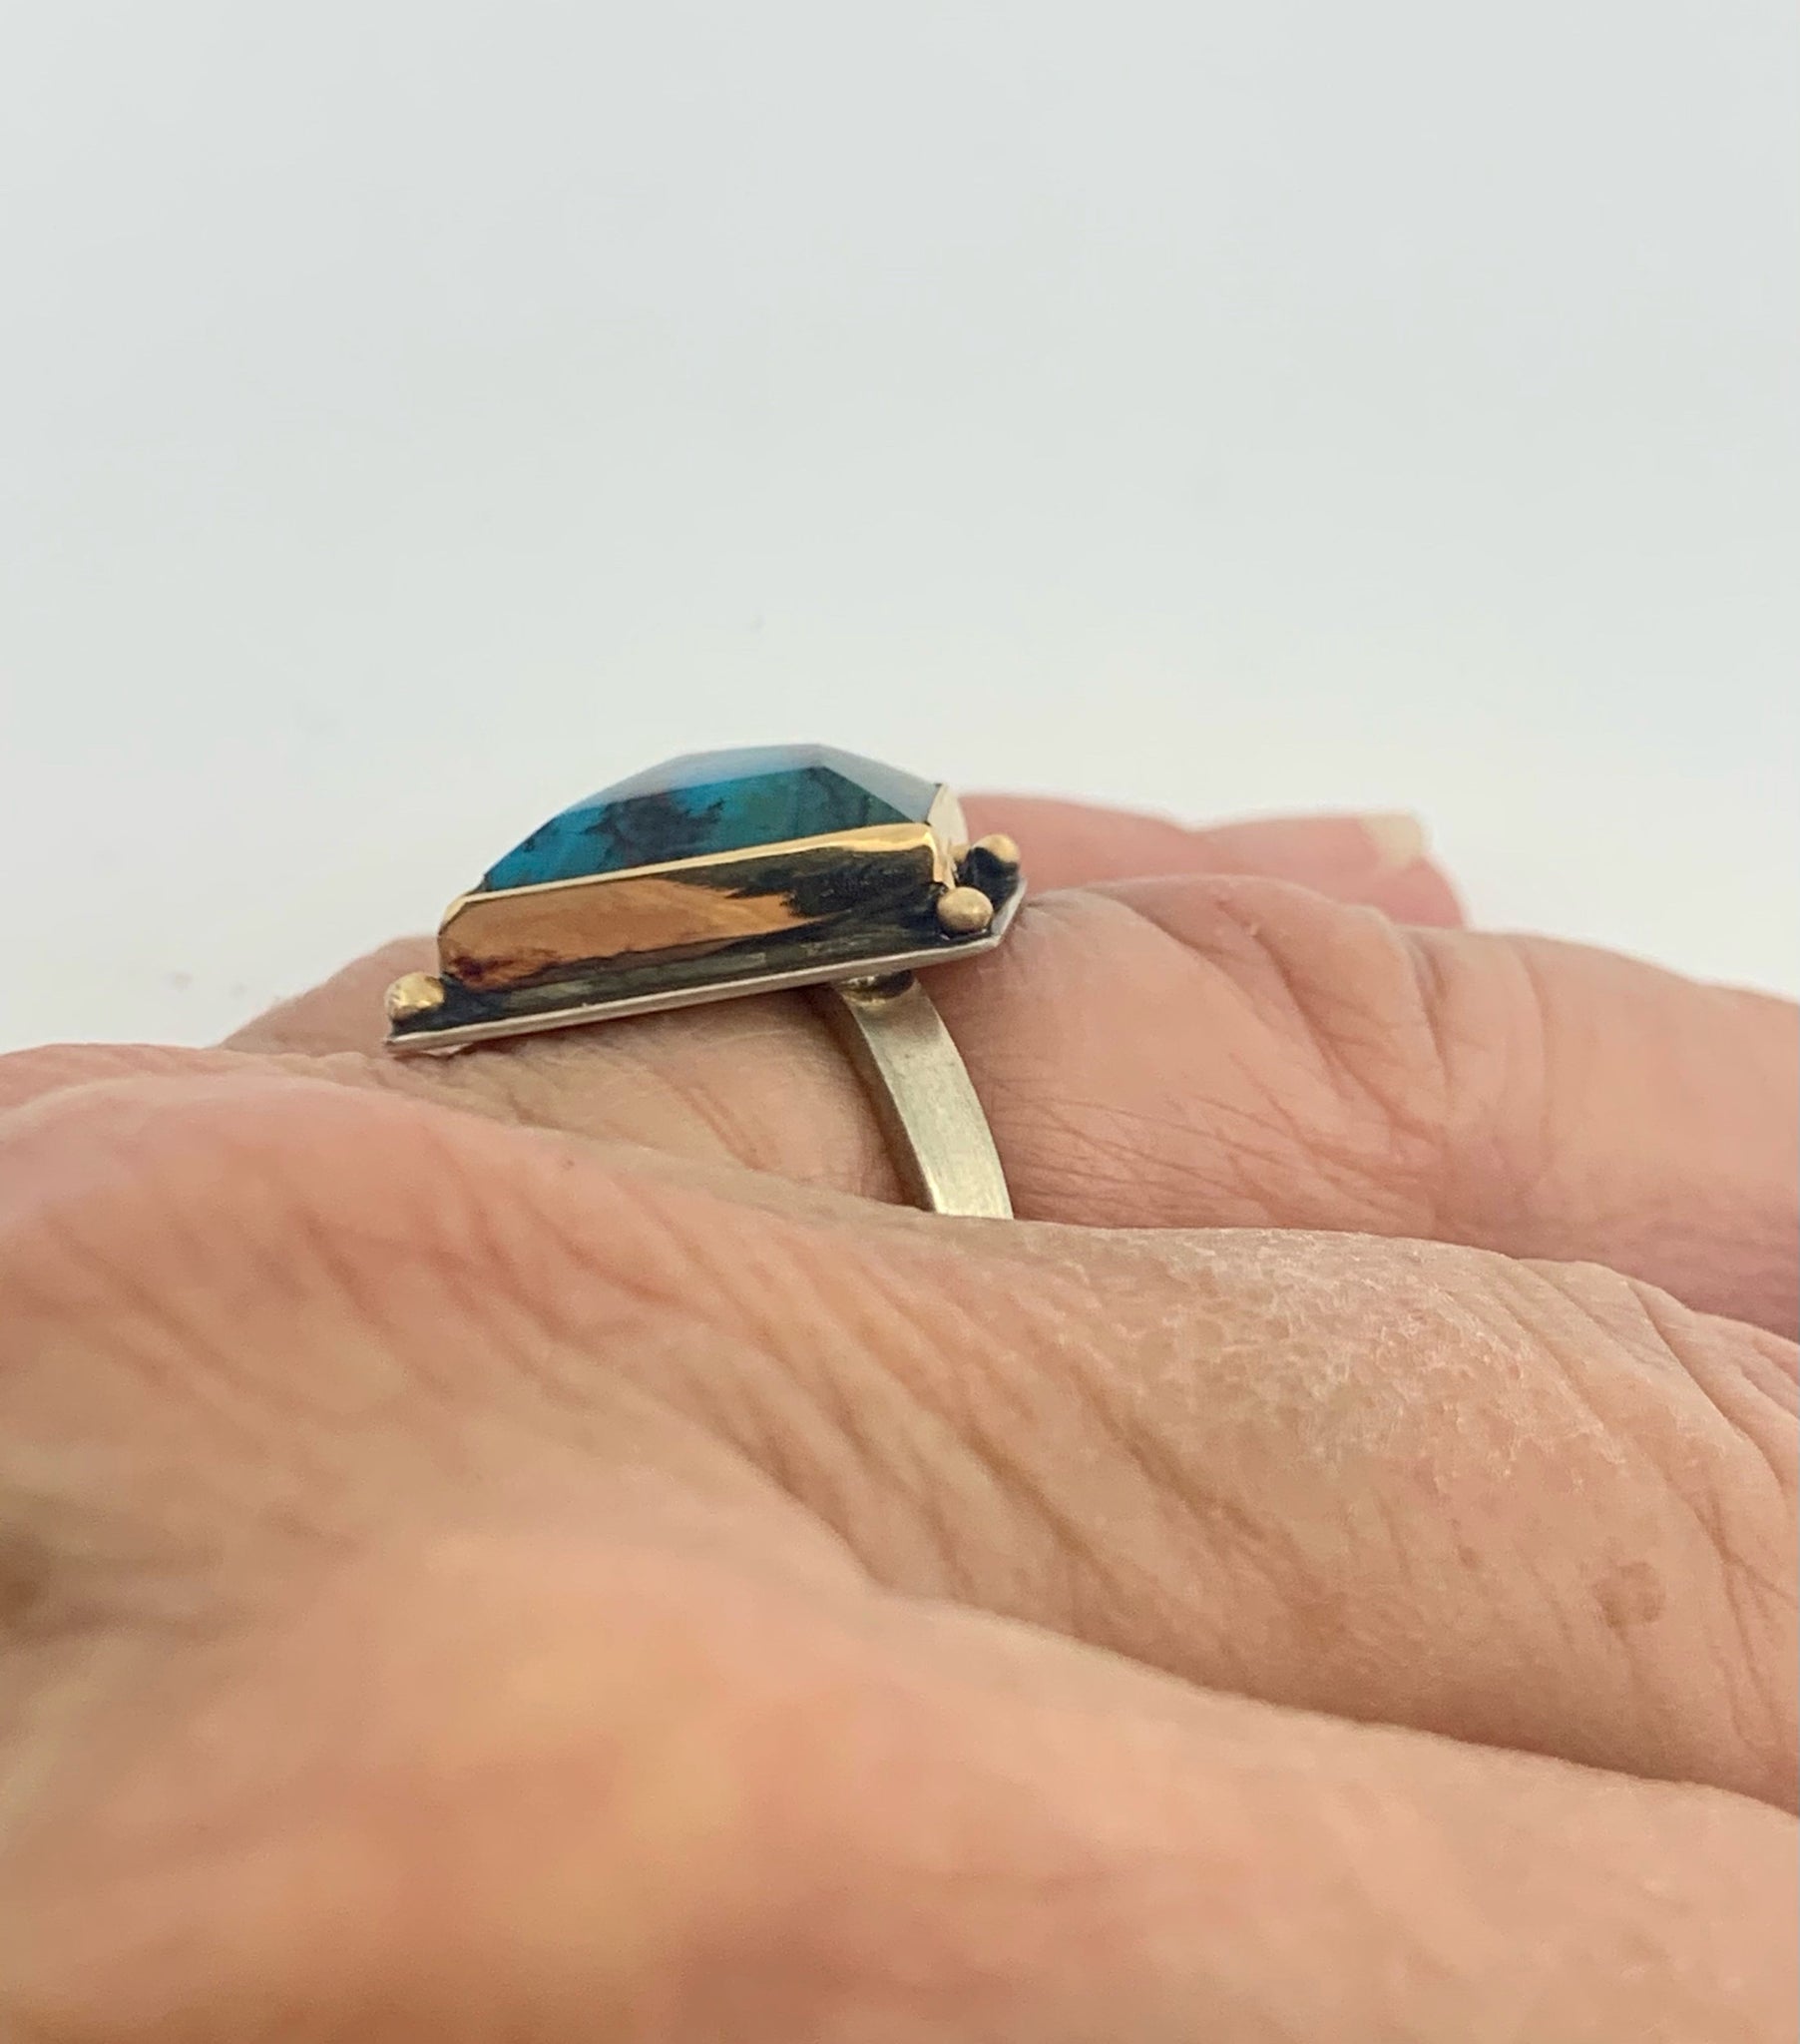 Indonesian Opalized Wood Ring with 14k gold details,  Opal and 14k Gold Ring, Blue Stone Statement Ring